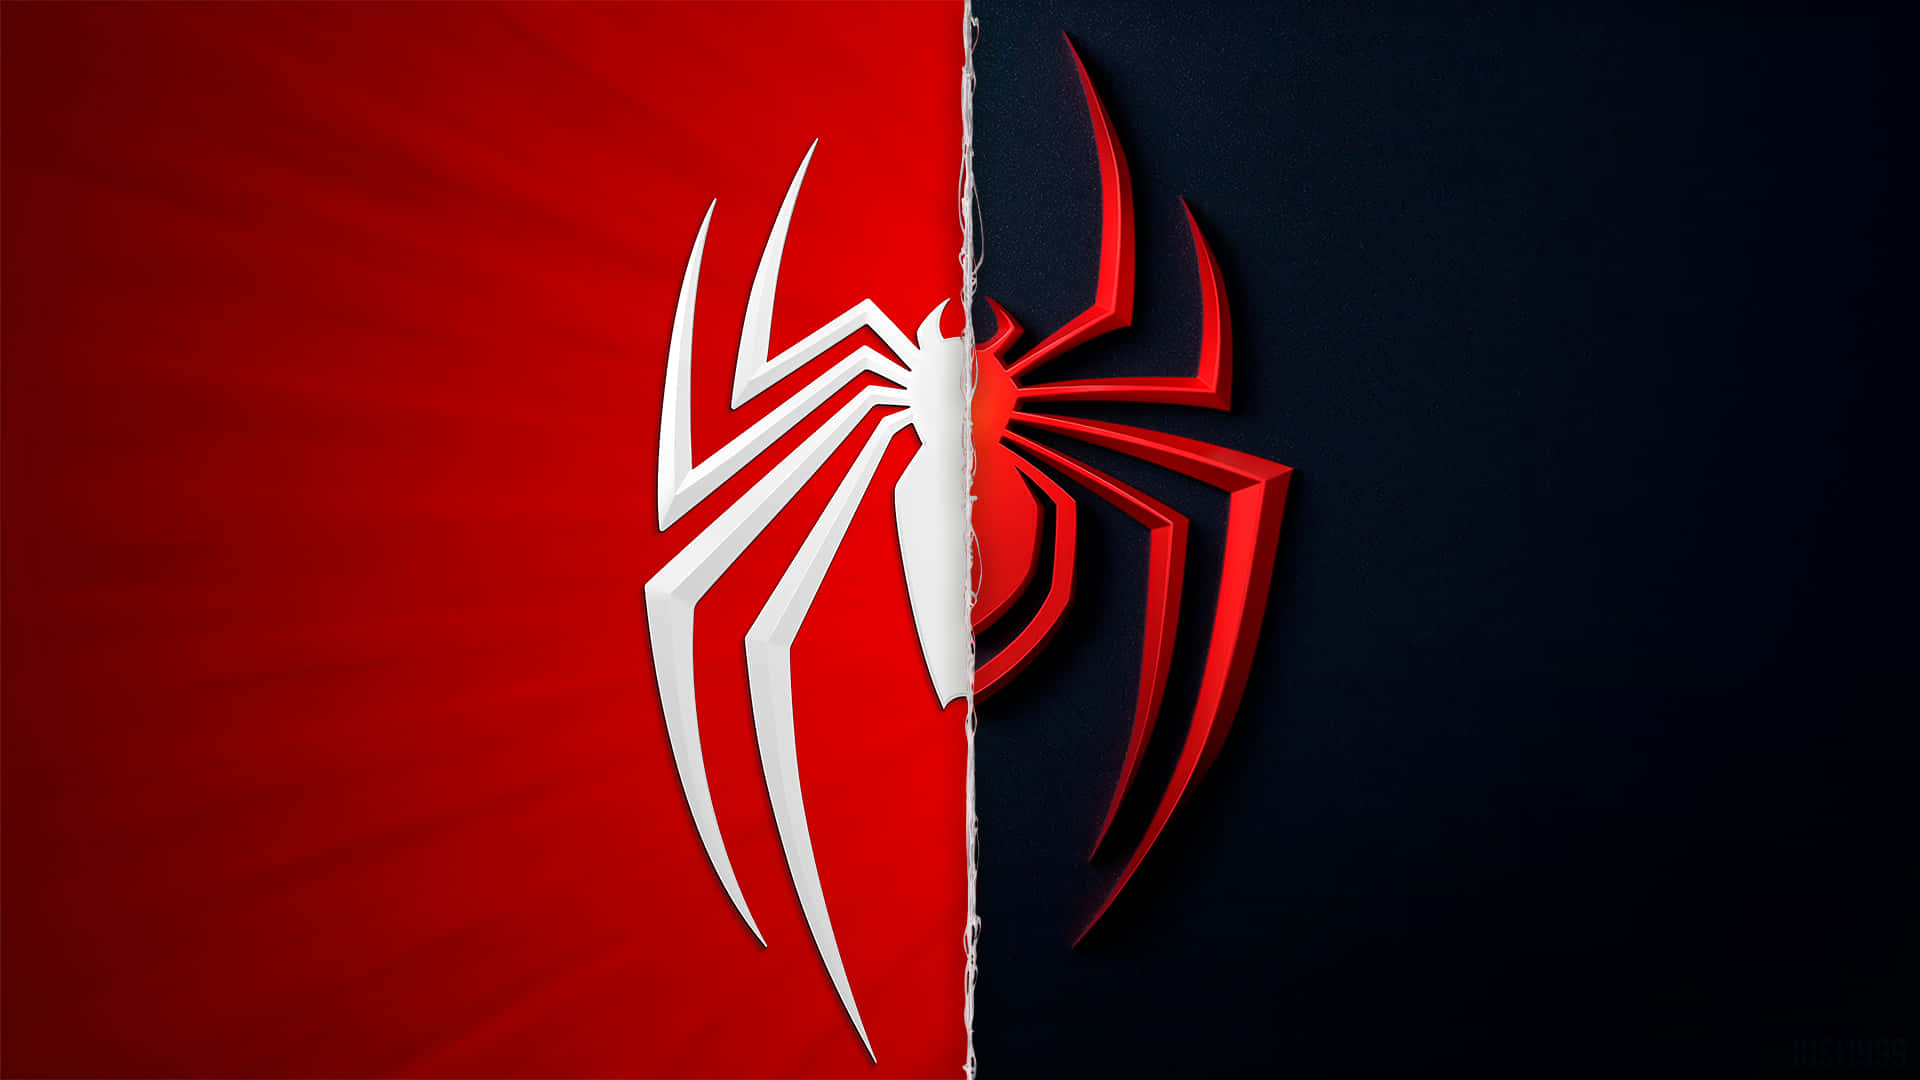 Spider Man Ps4 Logo Black And Red Background Wallpaper